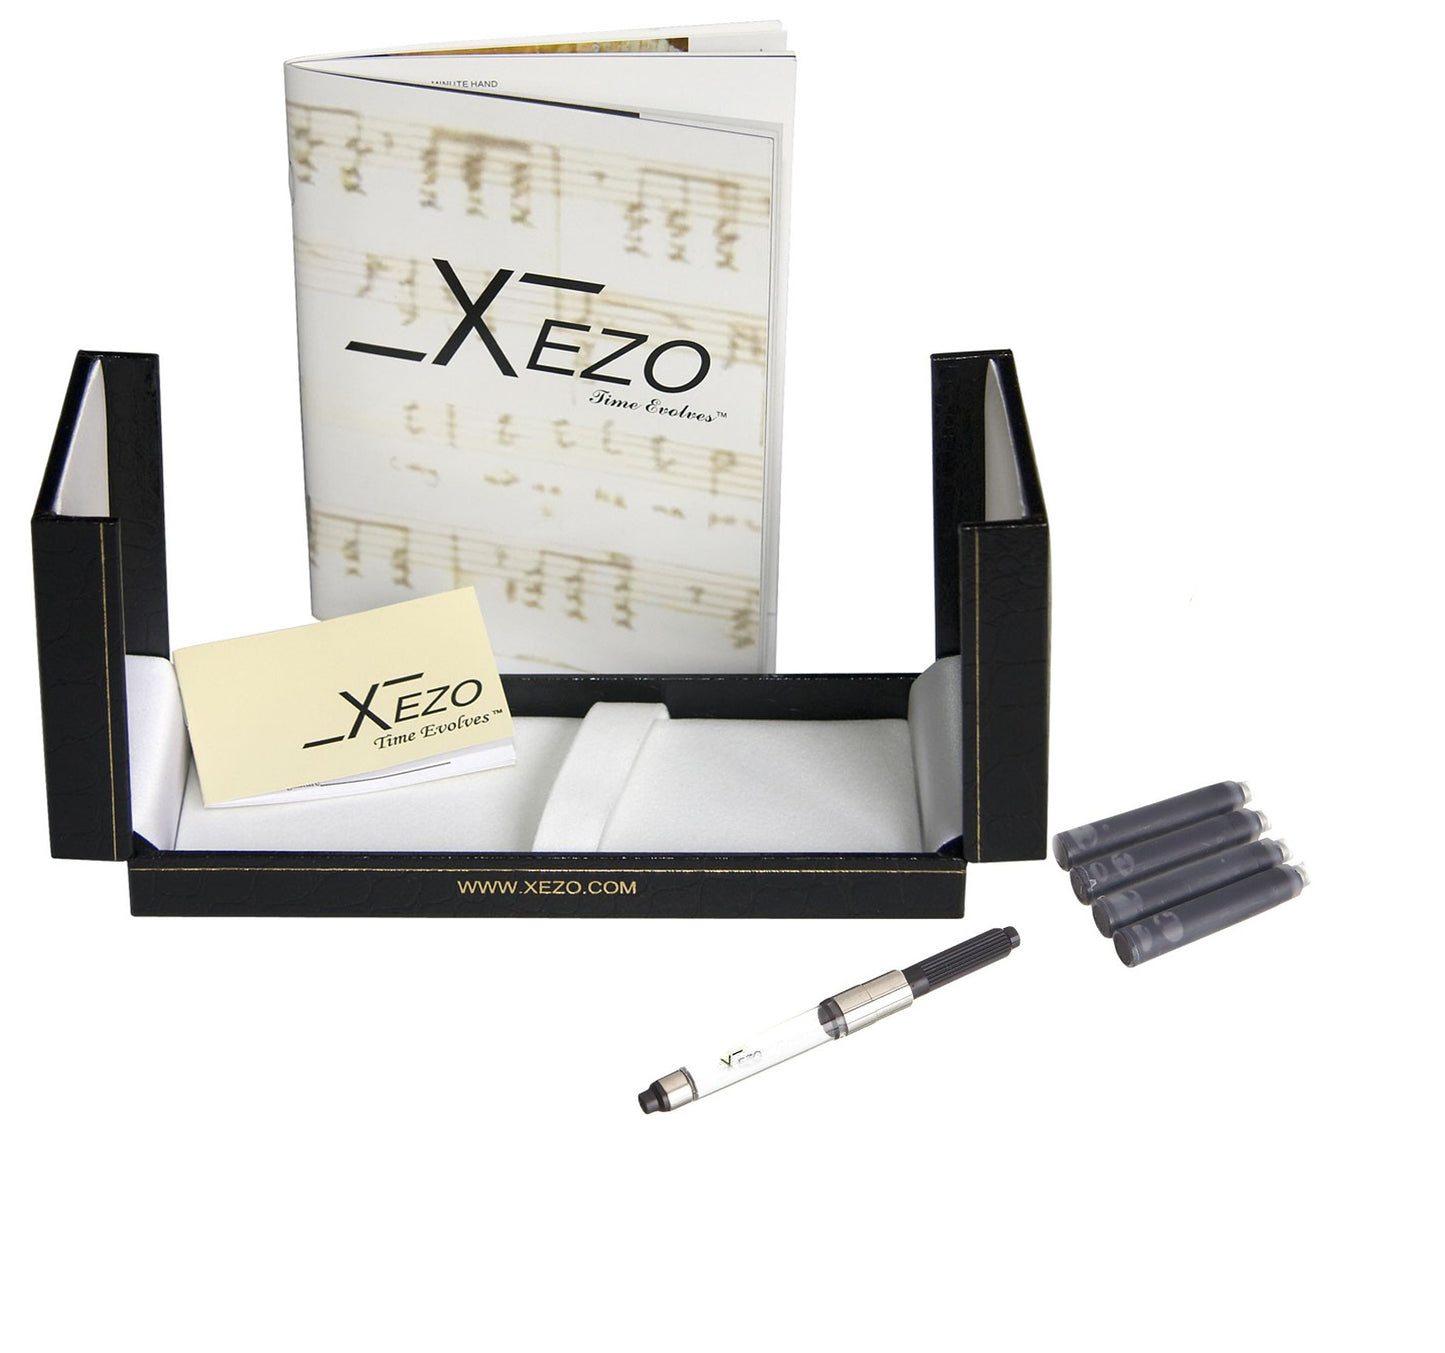 Xezo - Black gift box, certificate, manual, chrome-plated ink converter, and four ink cartridges of the Phantom Autumn F fountain pen